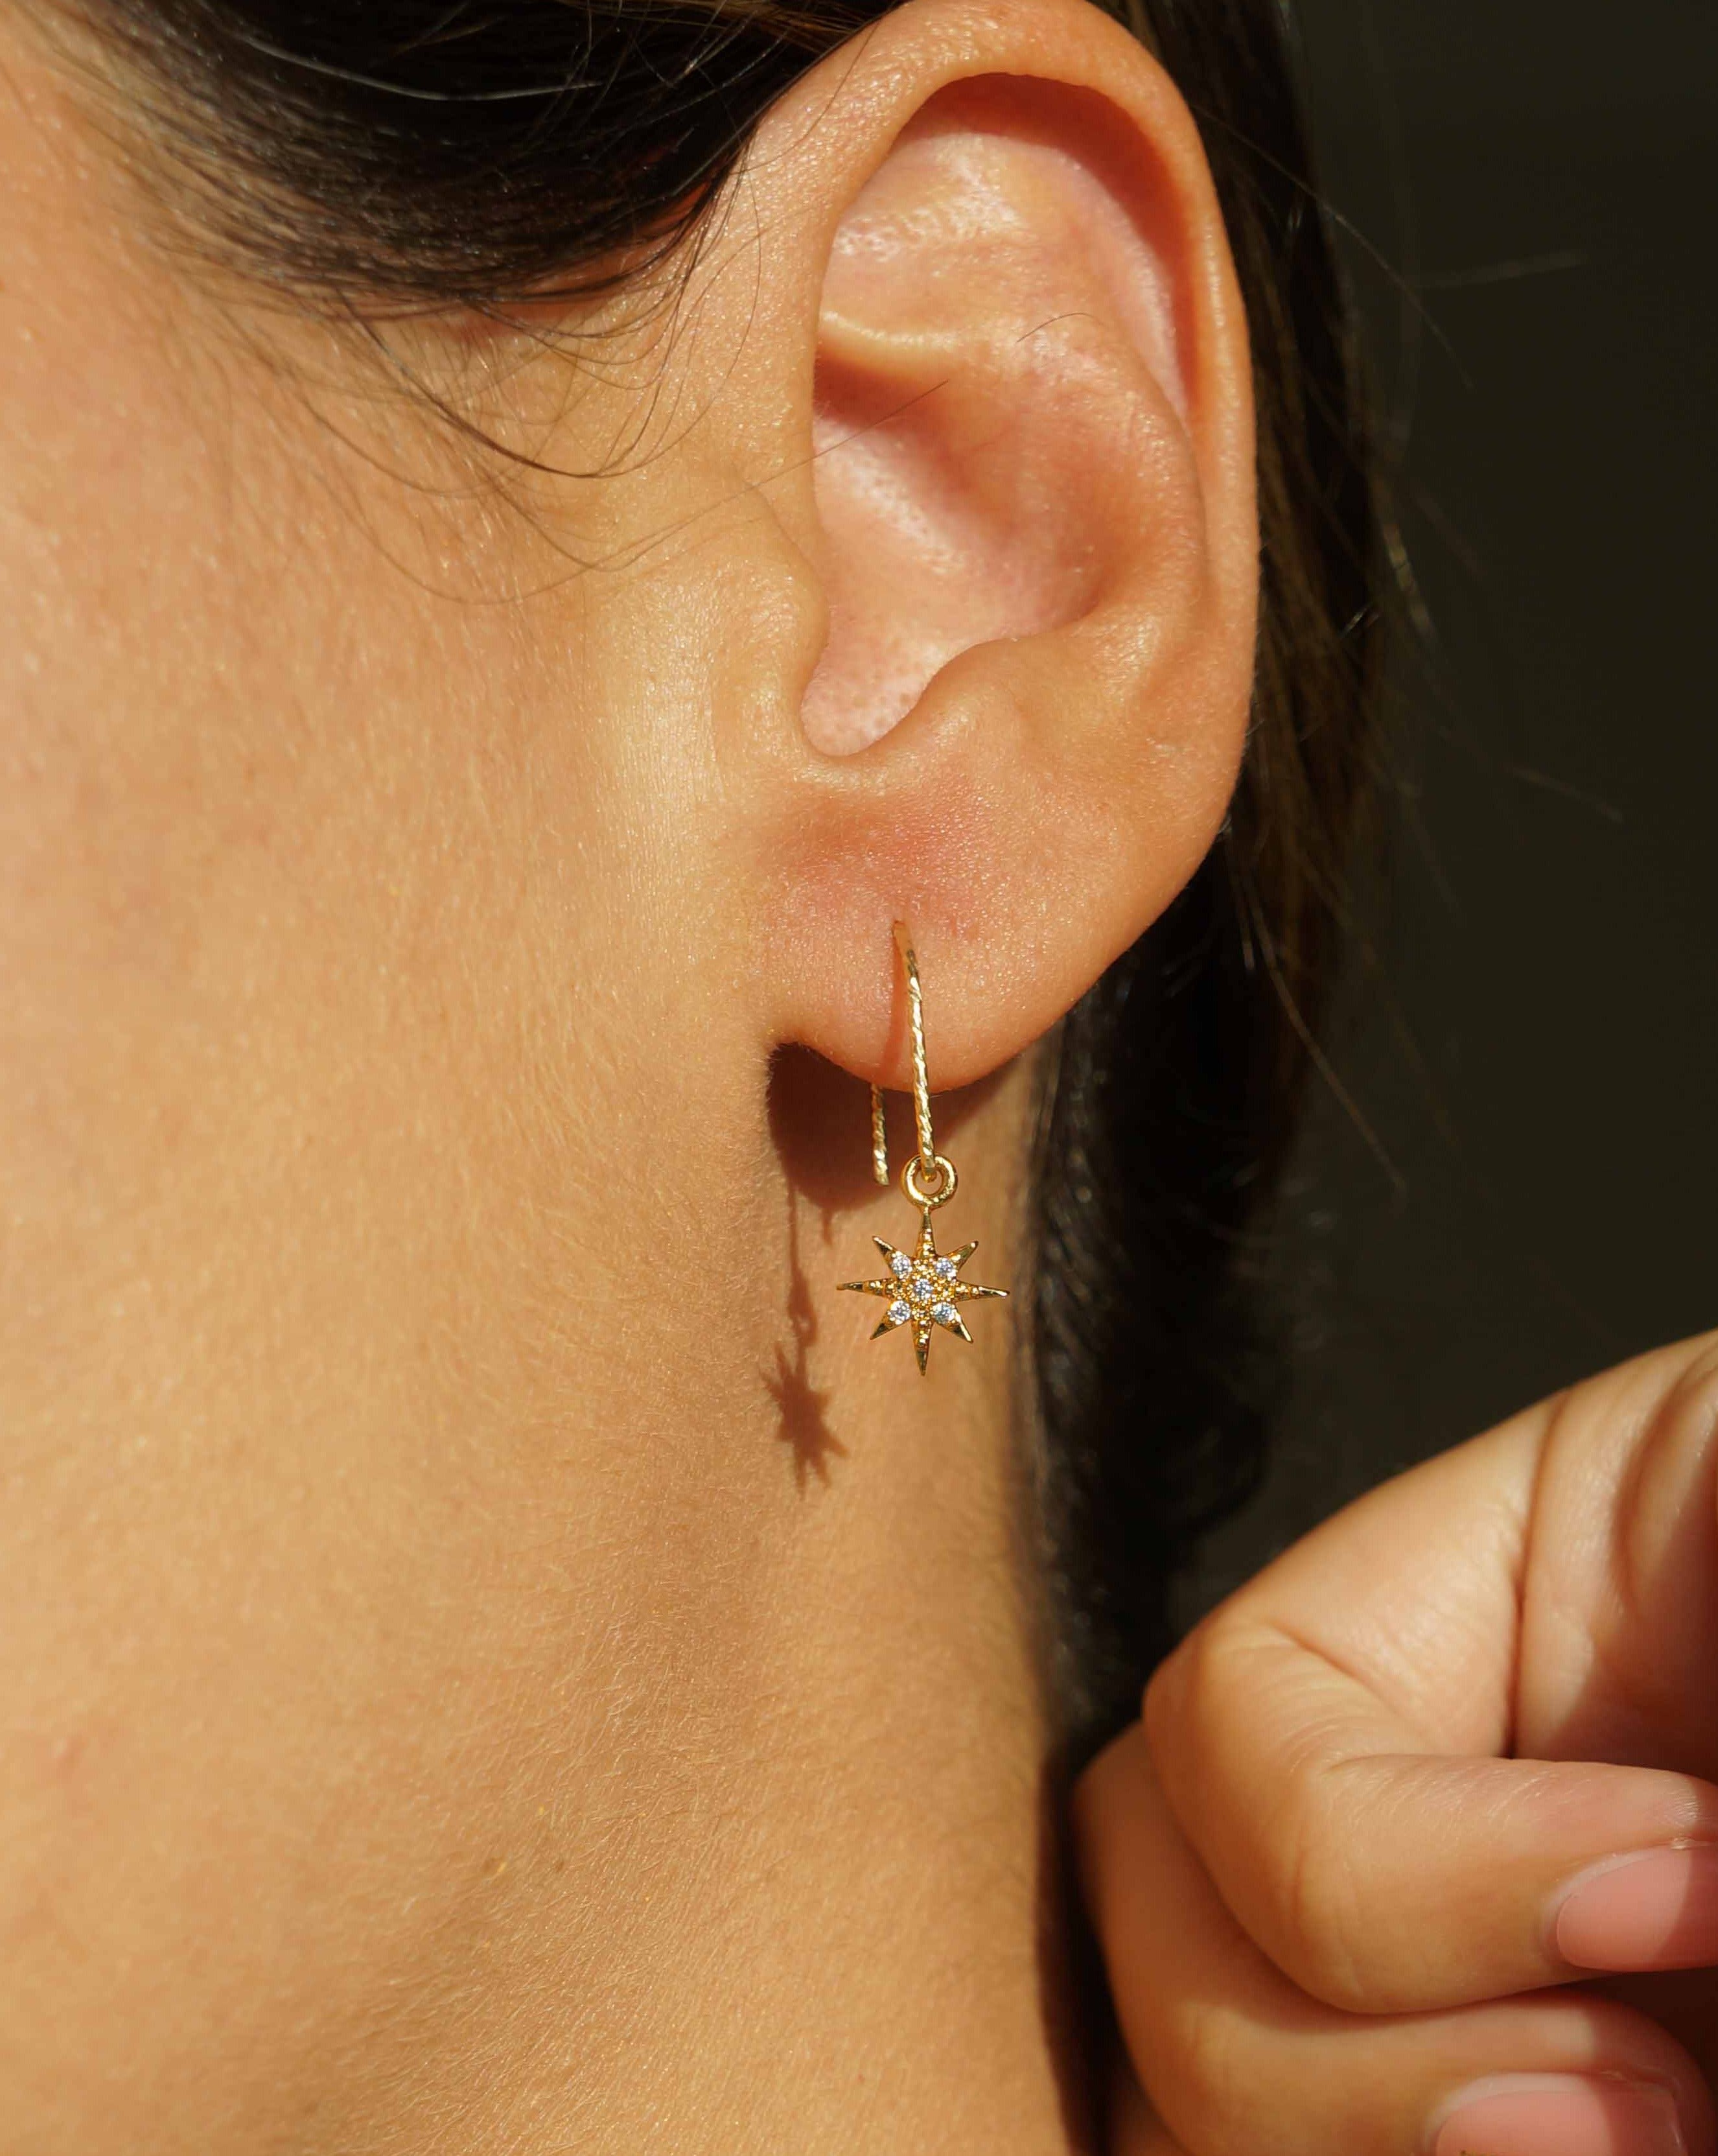 You Star Earrings by KOZAKH. Diamond textured hook earrings, crafted in 14K Gold Filled, featuring a Cubic Zirconia encrusted 8 point star charm.